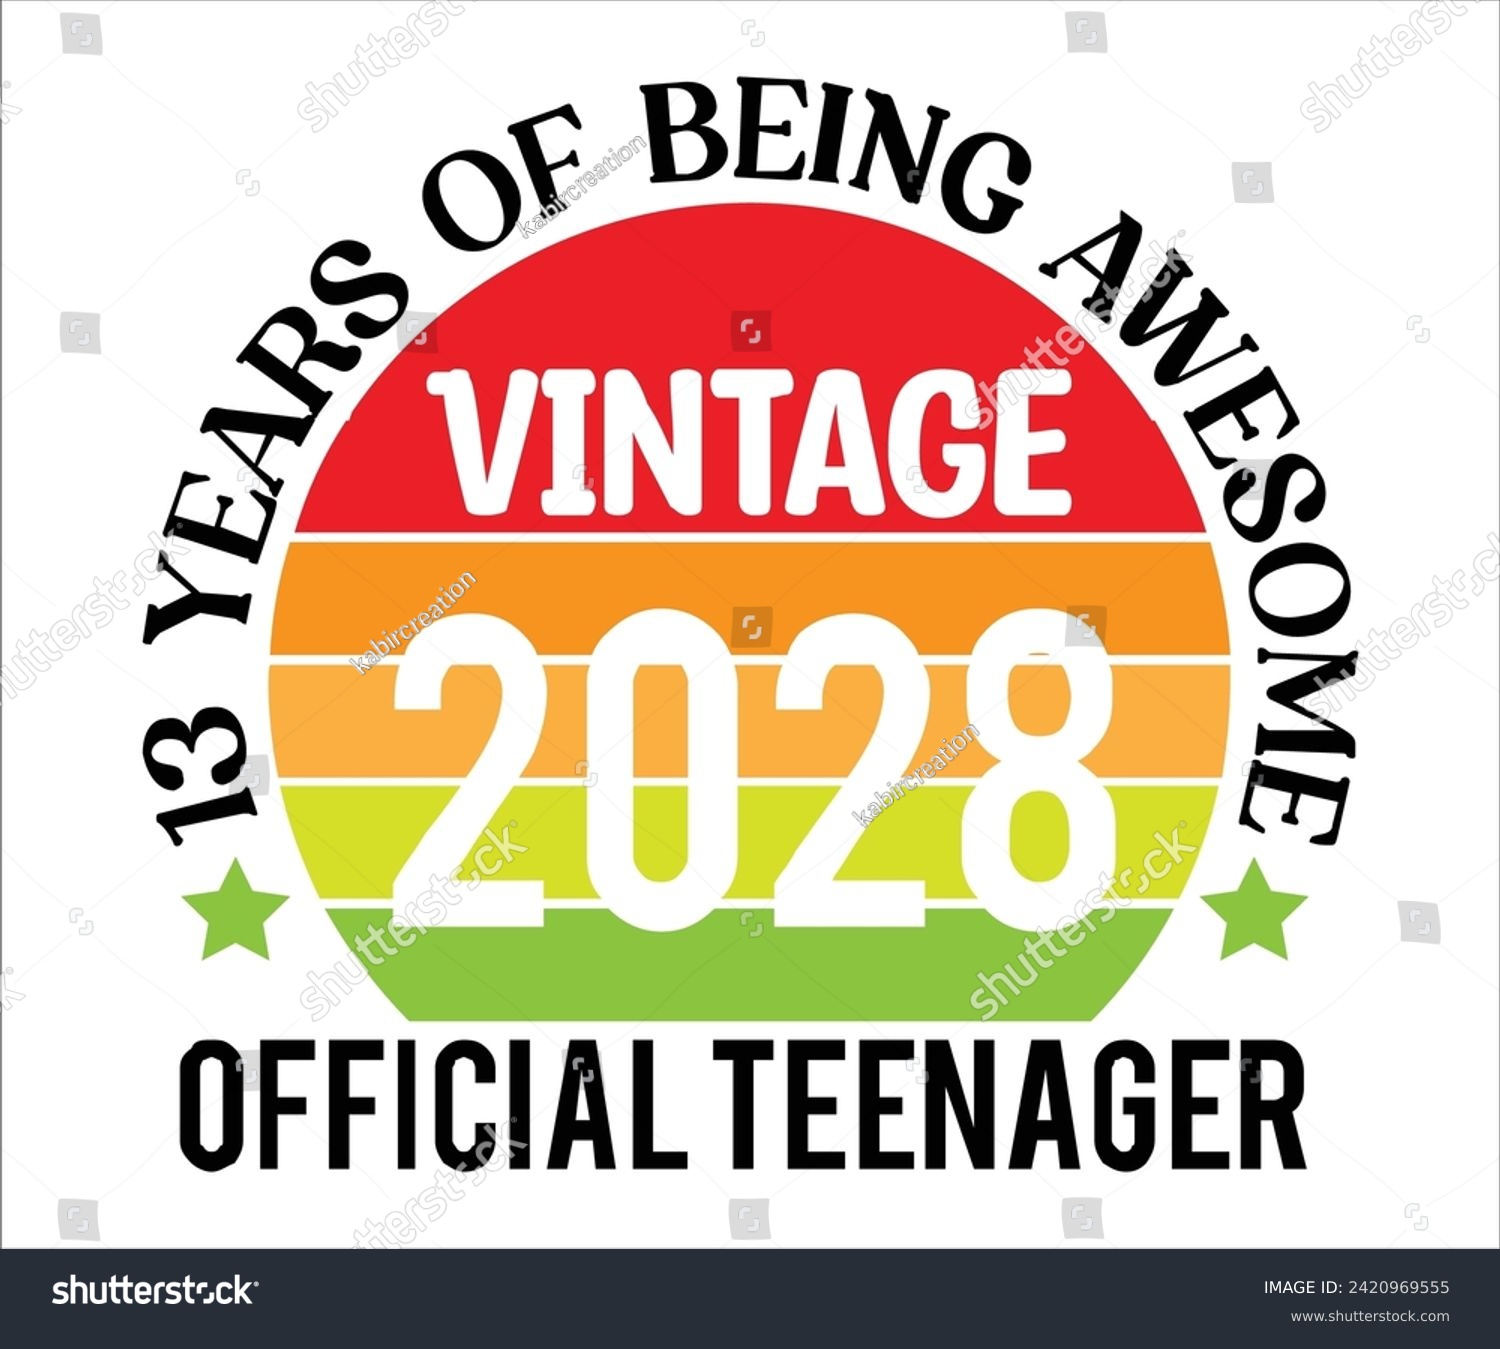 SVG of 13 Years Of Being Wesome 2028 Official Teenager T-shirt,100 Day School Svg,100 Day School T-shirt, welcome Back To, School Day, 100 Days Of School Shirt Boy, 100 Days Shirt svg